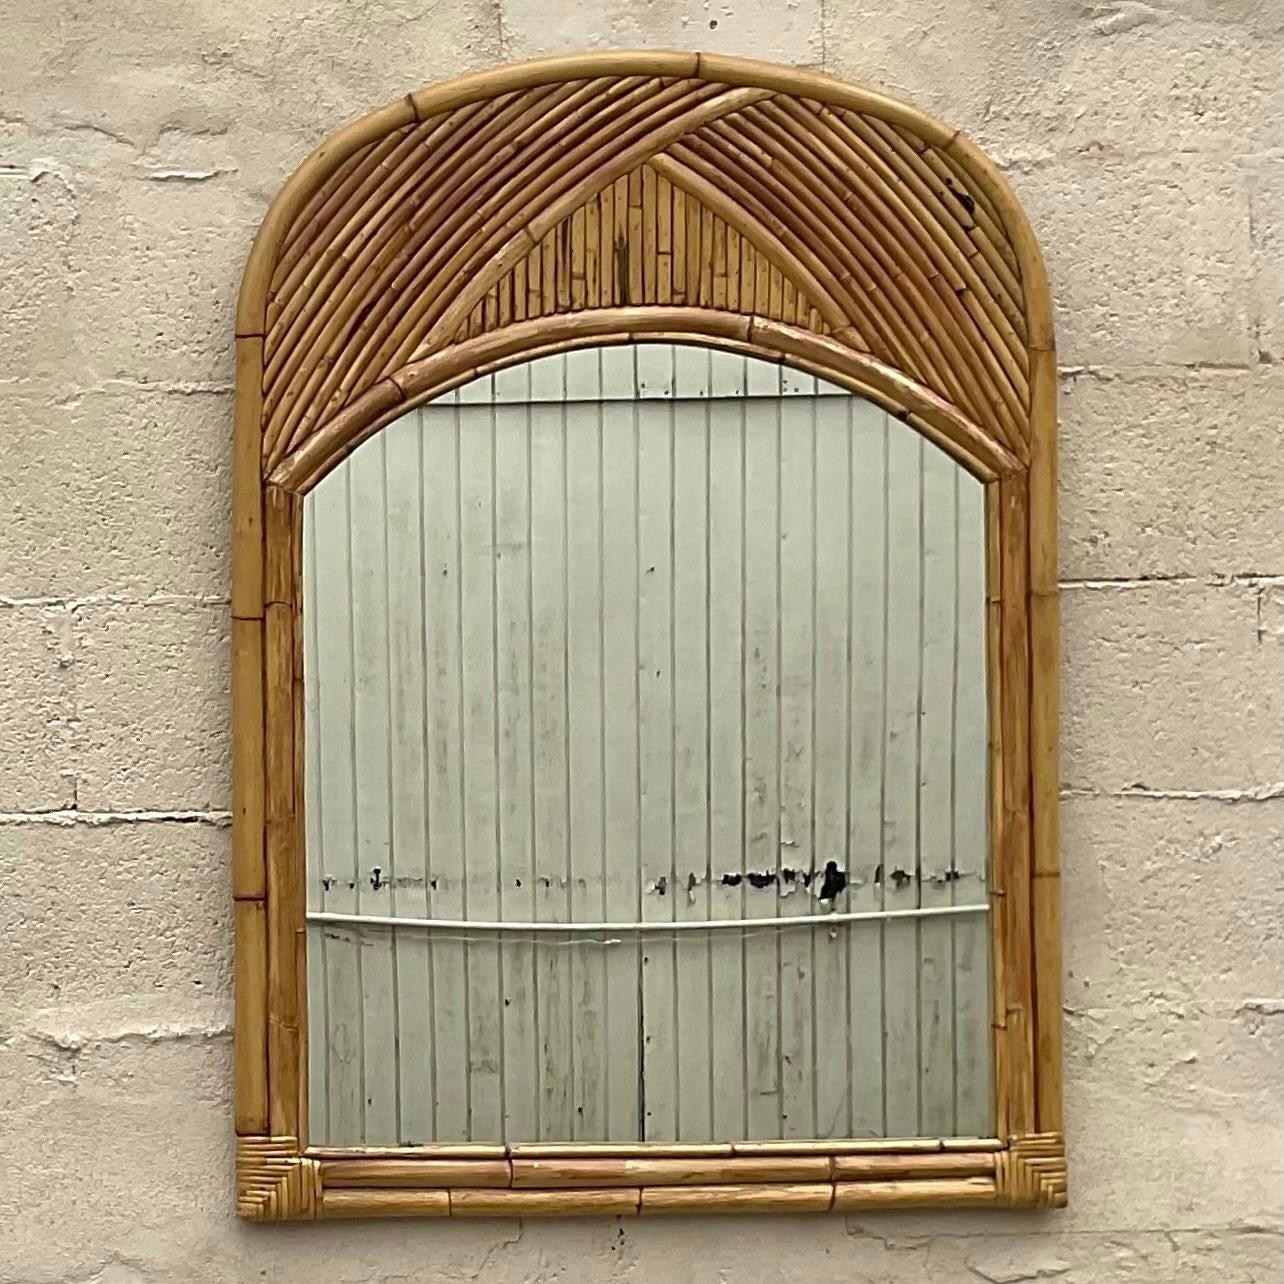 A fabulous vintage Costal wall mirror. Chic bent rattan is an arching design. Acquired from a Palm Beach estate.